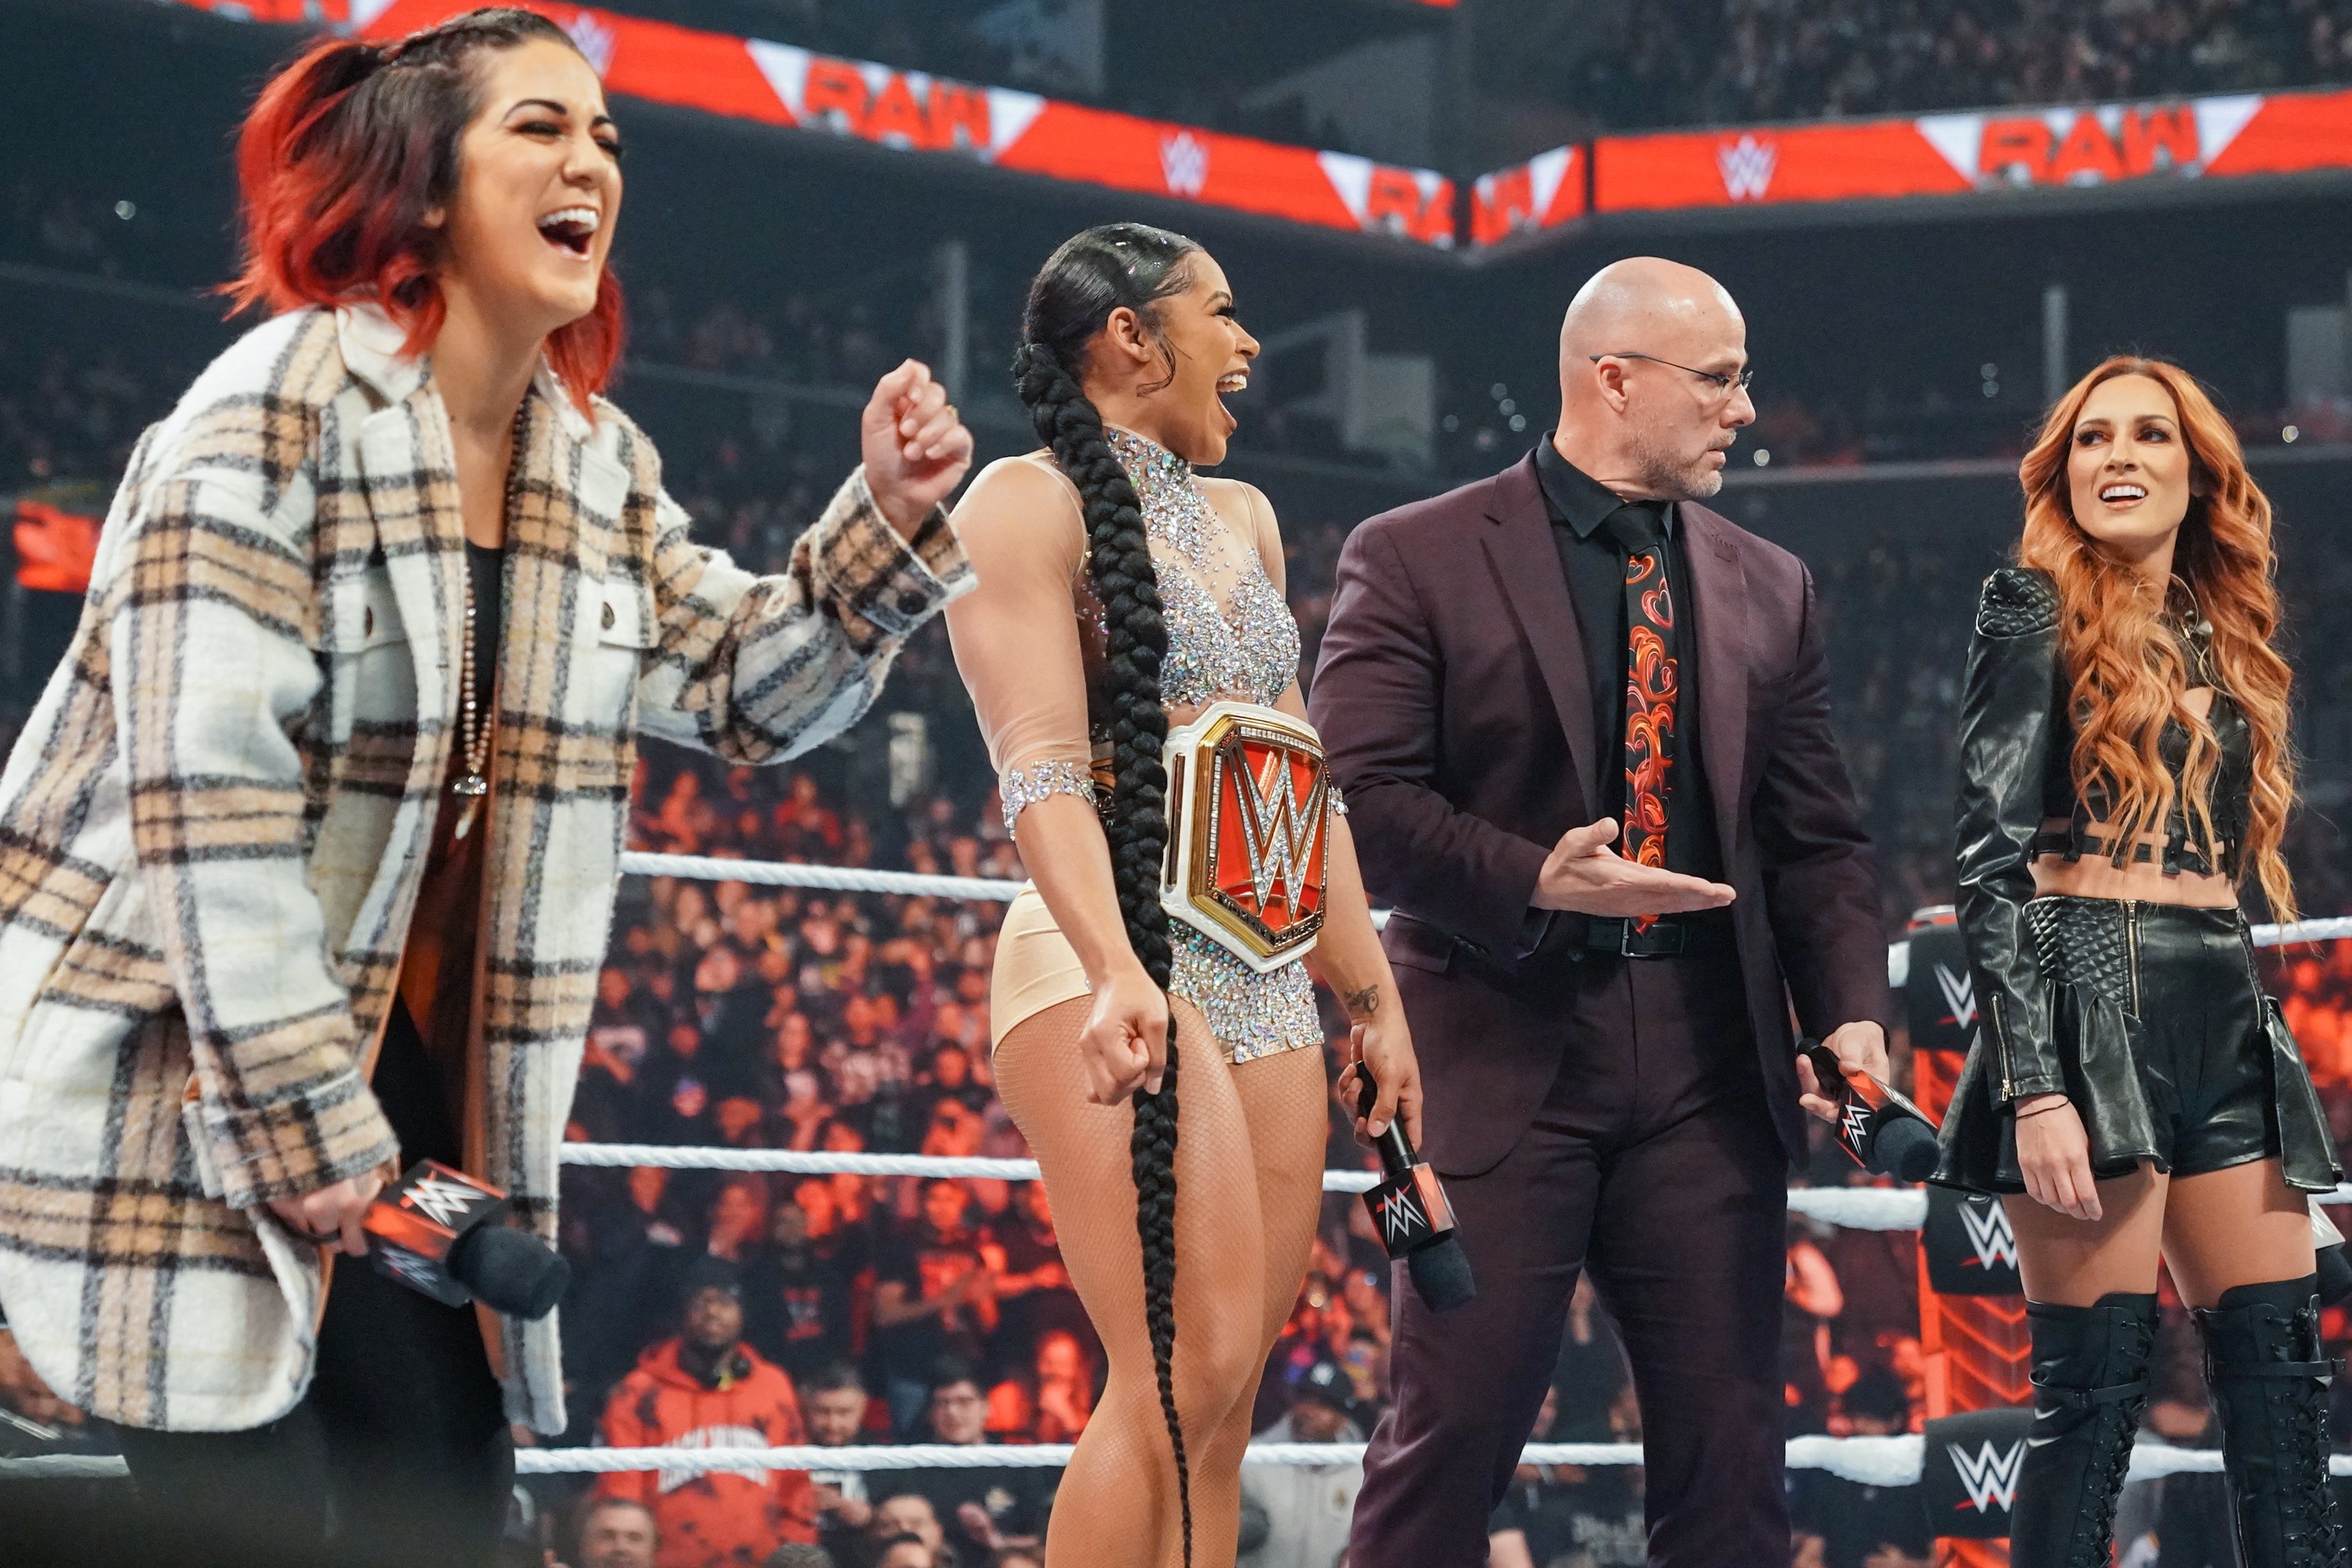 WWE Raw Live Results Bianca Belair decimated Bayley and Becky Lynch in